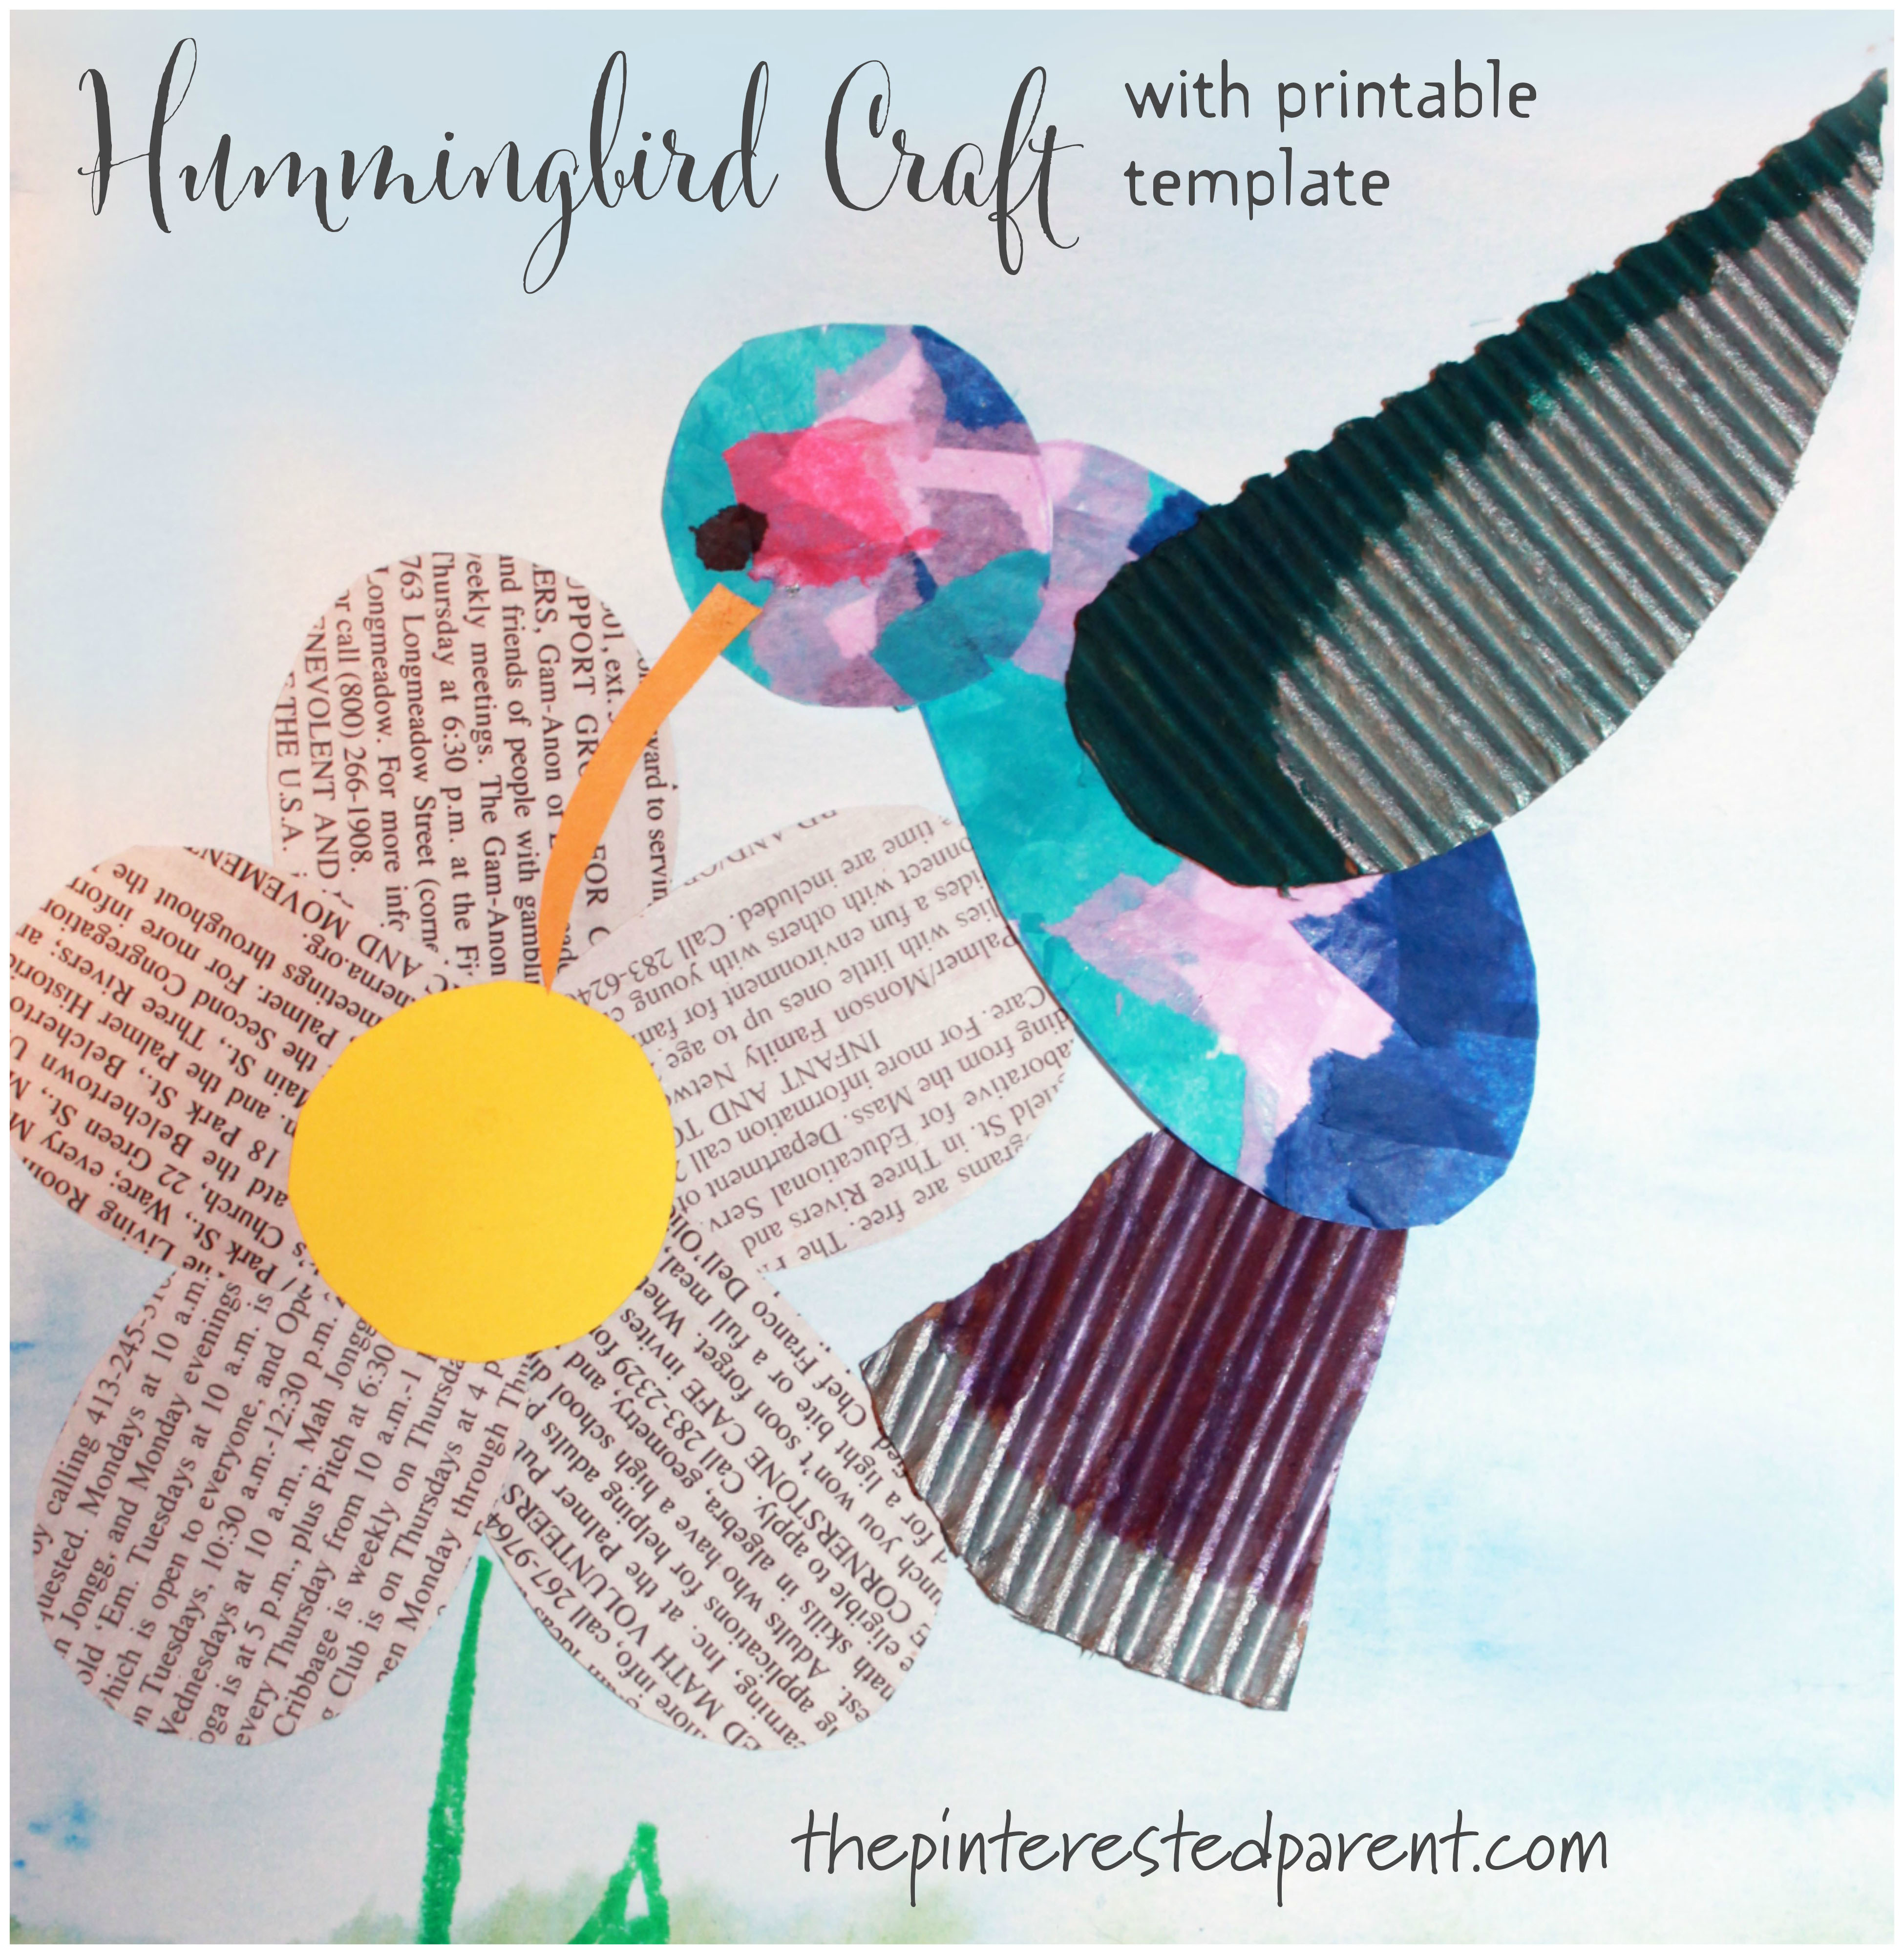 Hummingbird arts and craft for the spring and summer. Free printable template available for painting, coloring, mixed media and more. Kids art ideas